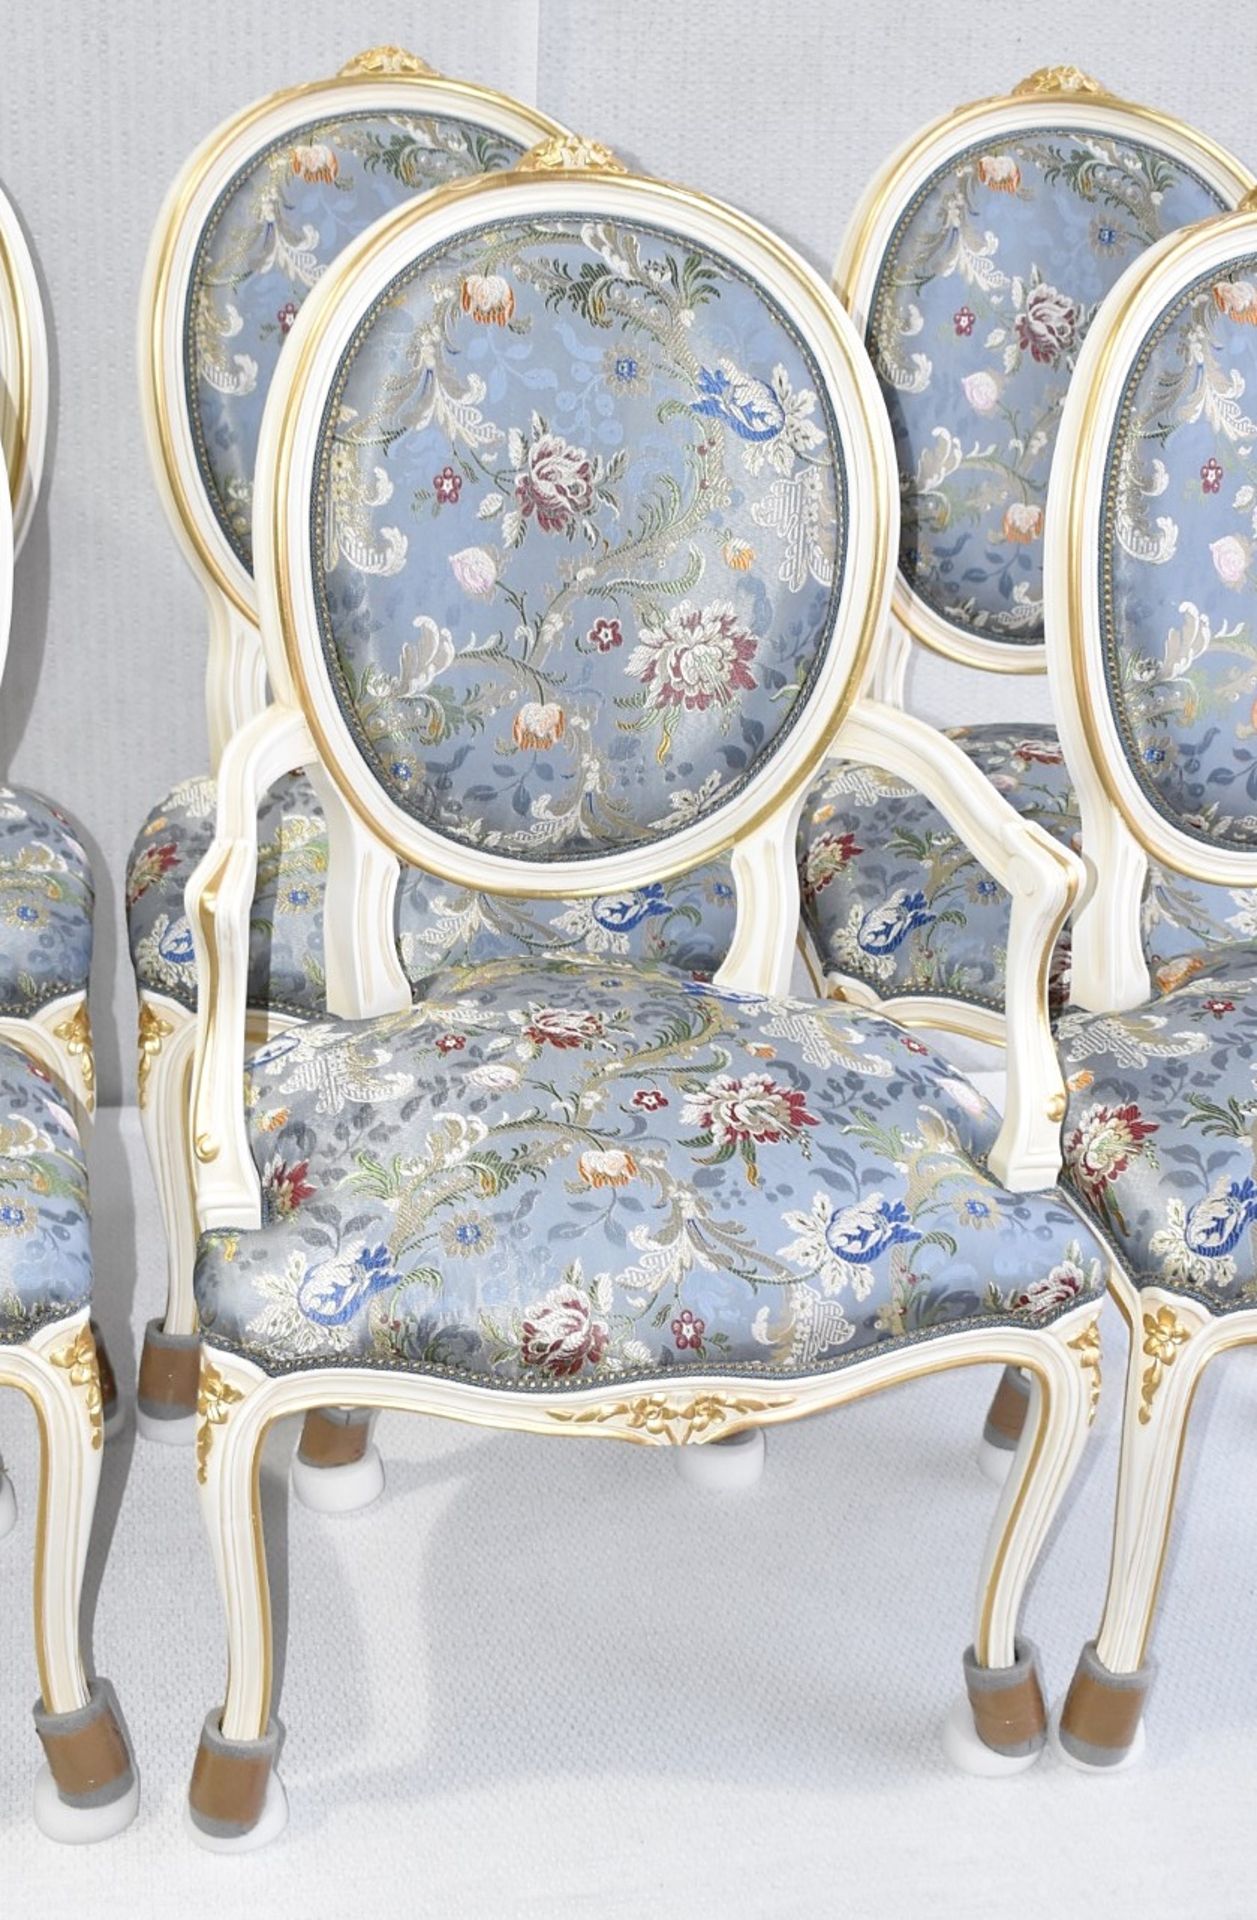 Set of 6 x ANGELO CAPPELLINI 'Timeless' Baroque-style Carved Dining Chairs, Floral Upholstered - Image 10 of 14